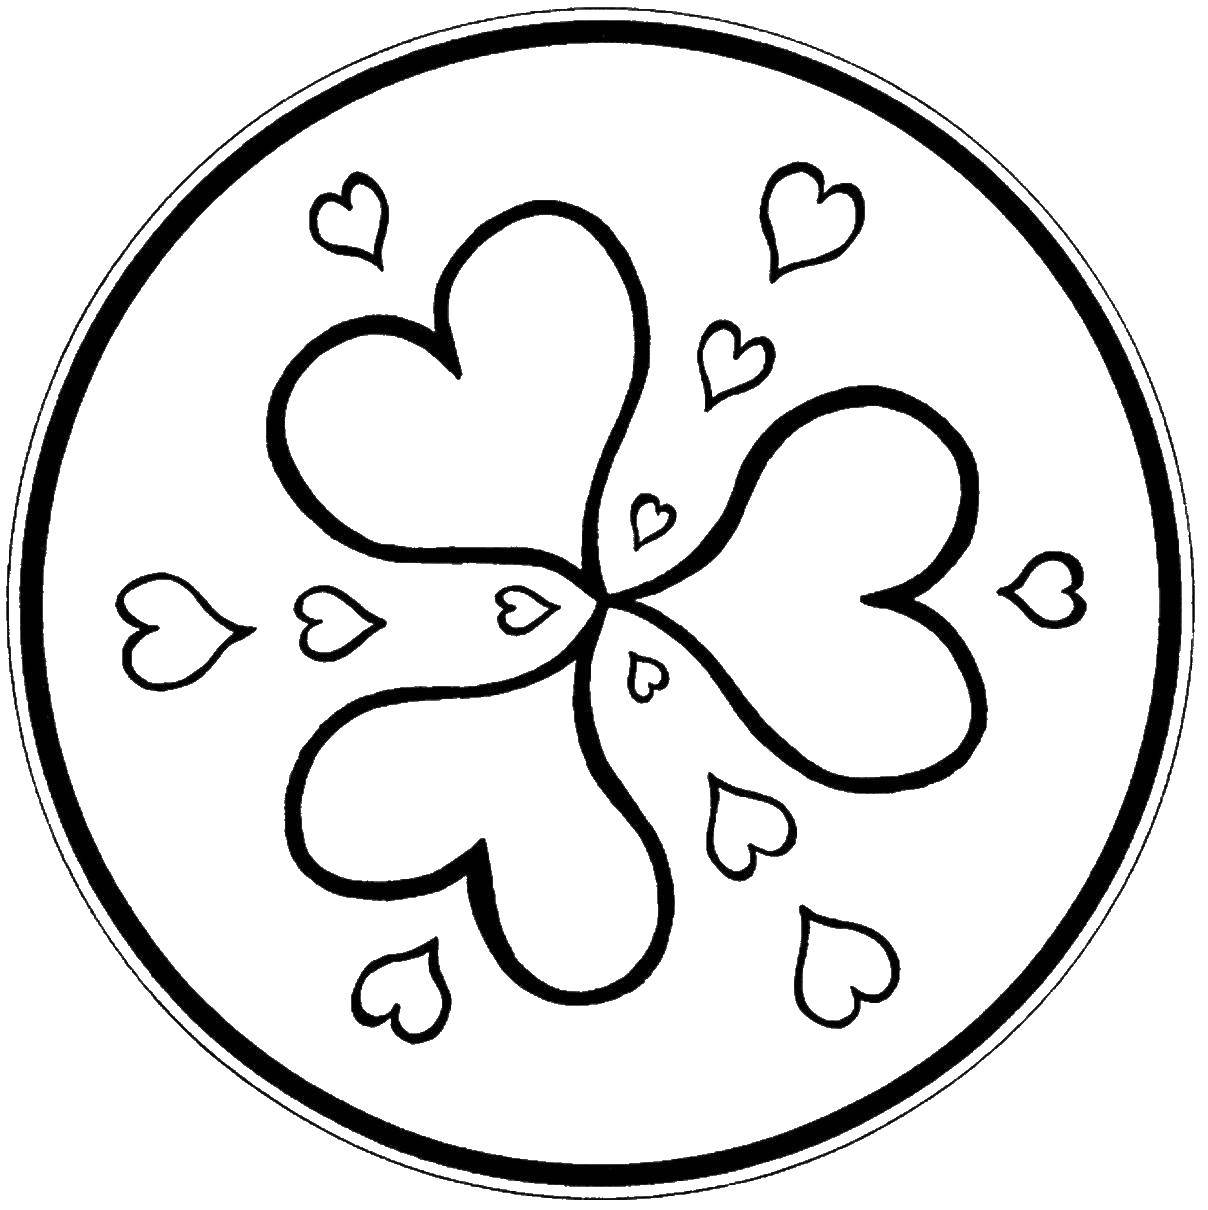 Coloring The hearts in the circle. Category patterns. Tags:  Patterns, hearts.